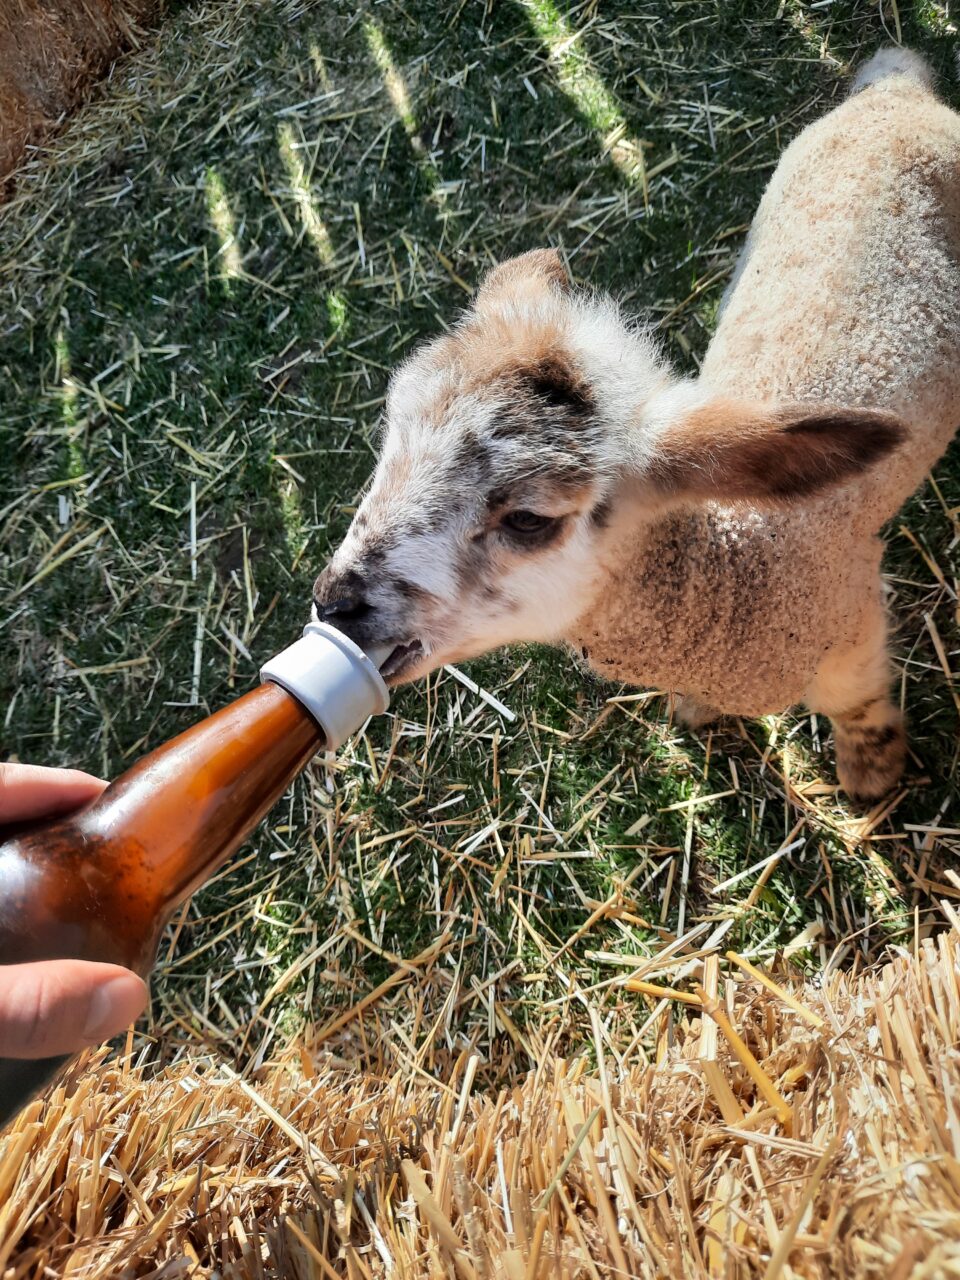 Baby animal being bottle fed